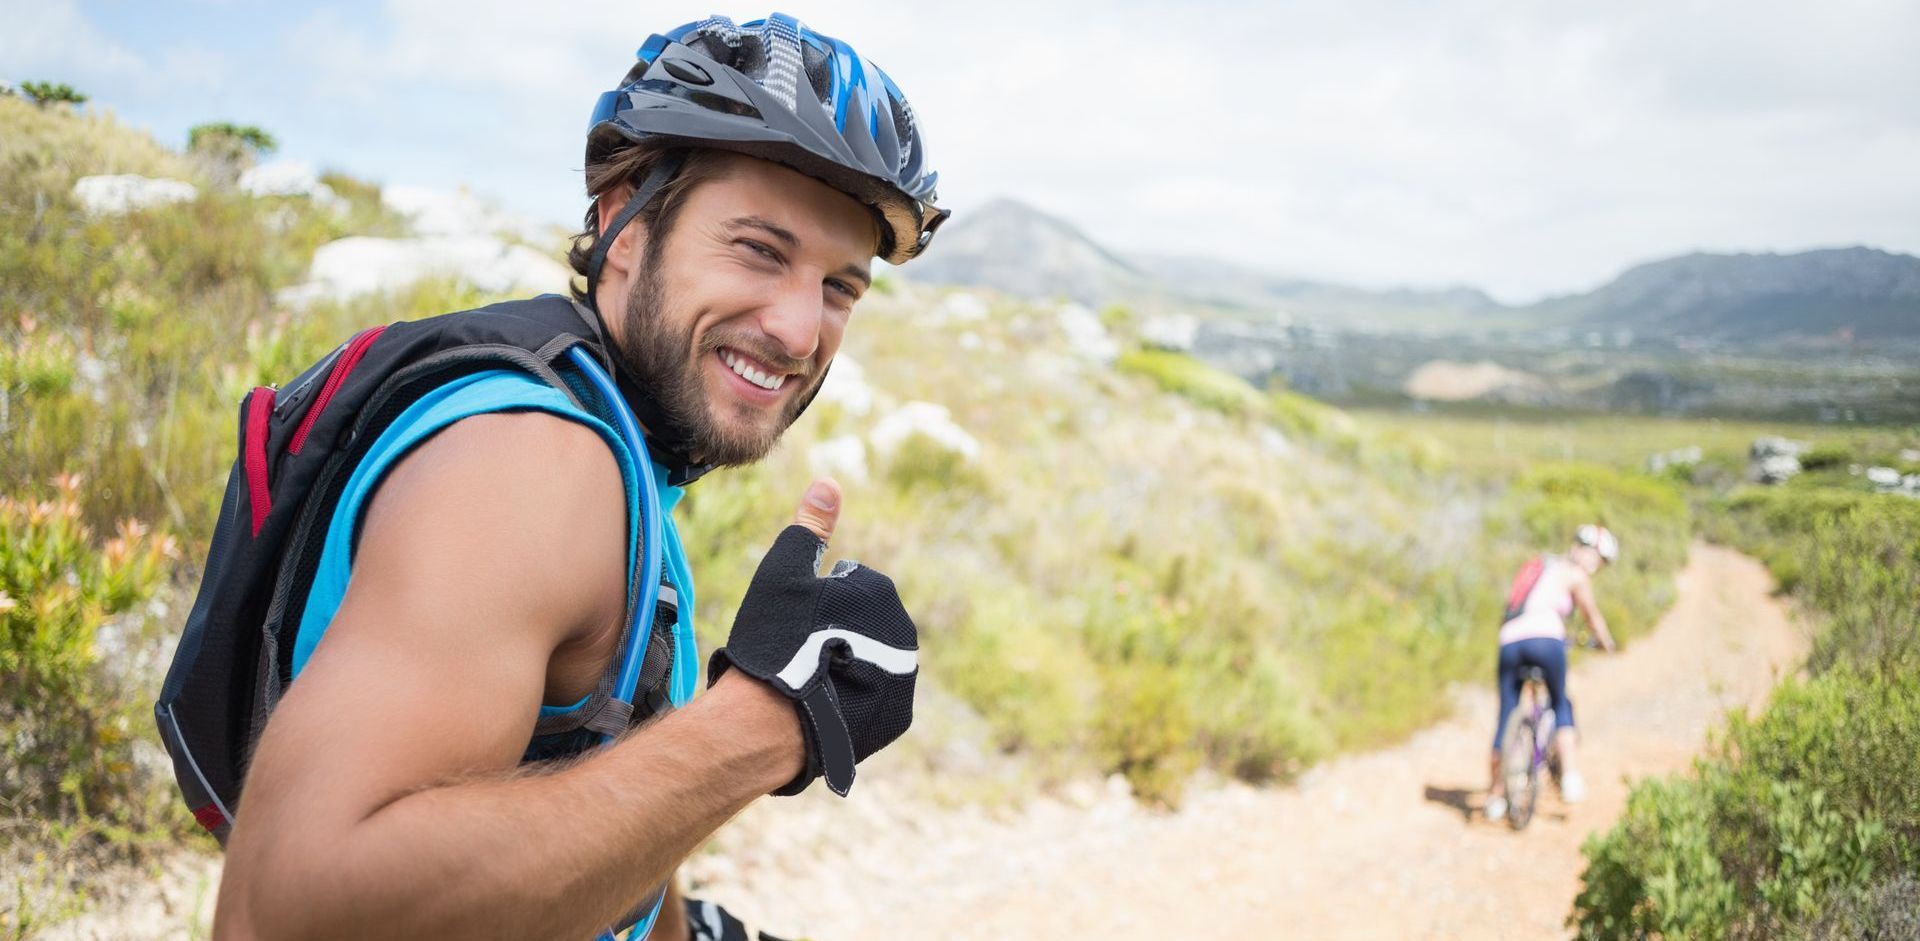 Man is giving a thumbs up while riding a bike on a trail after visiting Stem Cells Philadelphia for aesthetics and  regenerative medicine treatments.